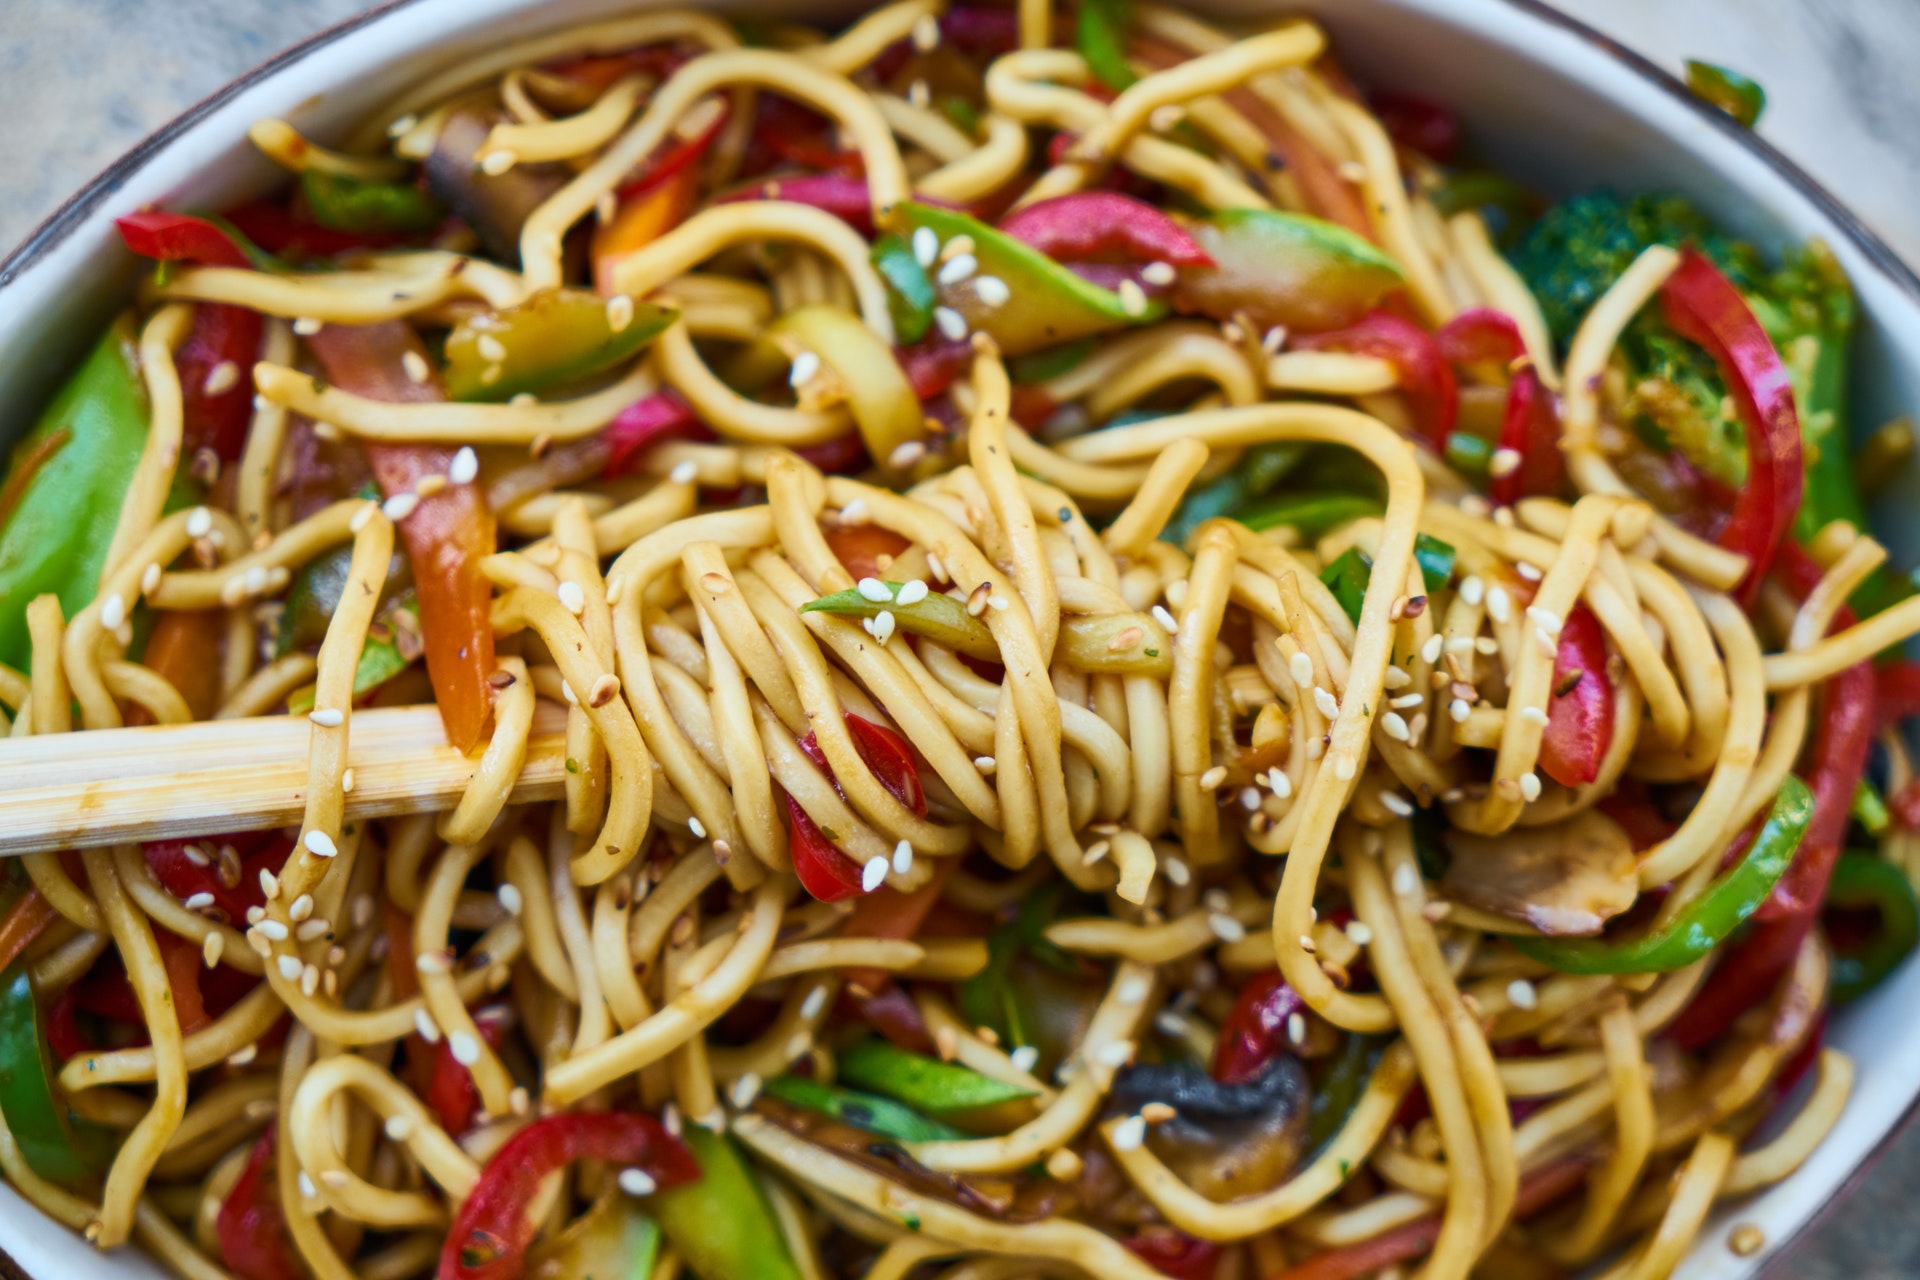 Bowl of Stir Crazy Thai cuisine dish available at Windsor and Penrith Takeaway or Eat In